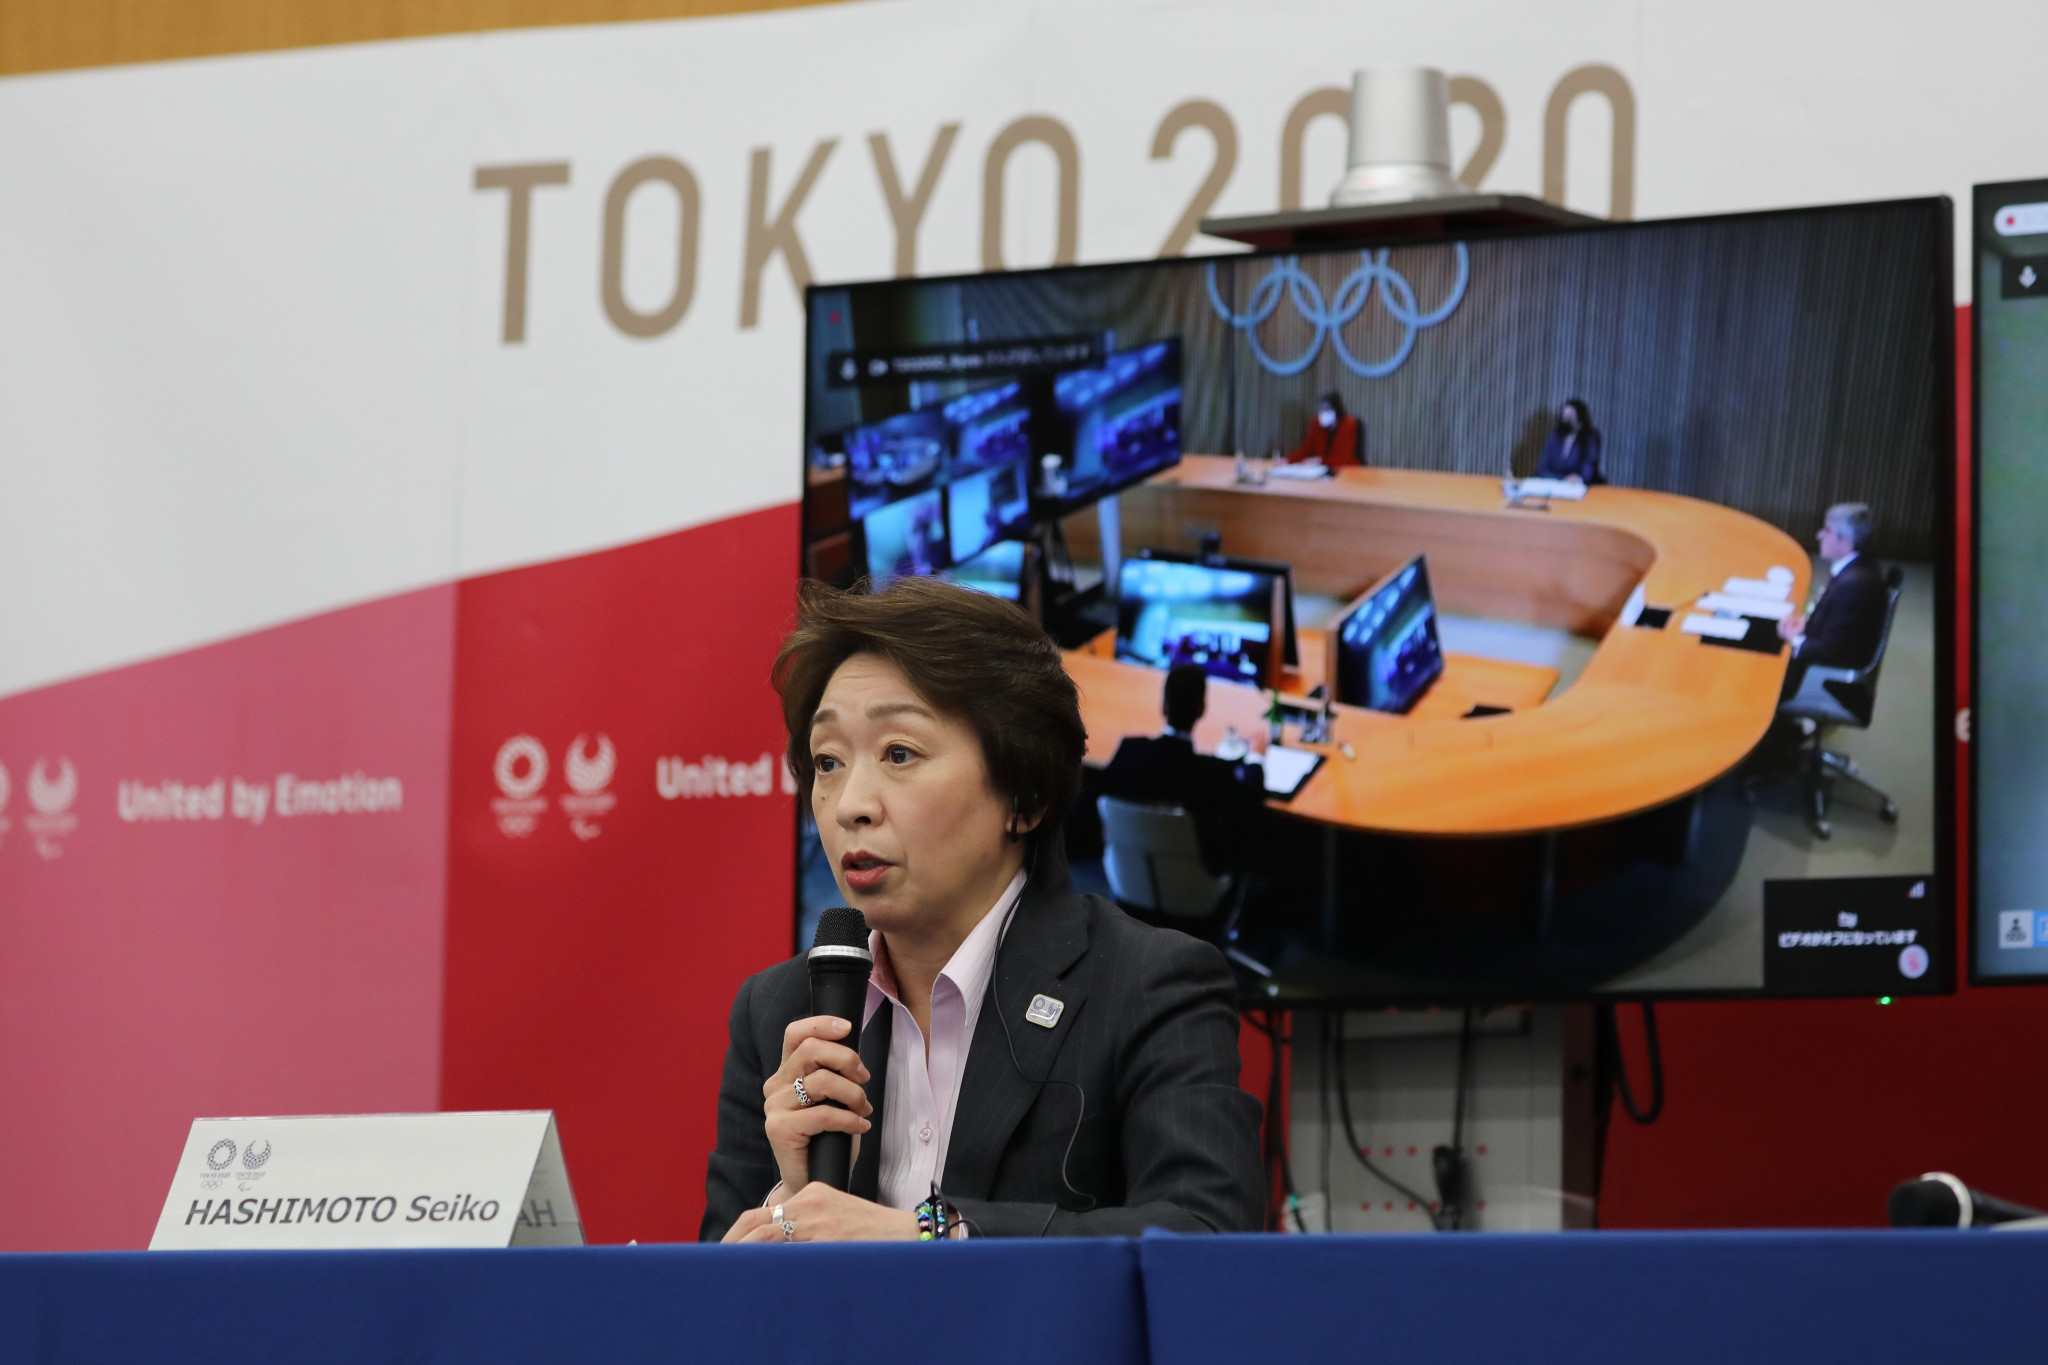 Tokyo 2020 appoints 12 women to Executive Board in response to sexism row